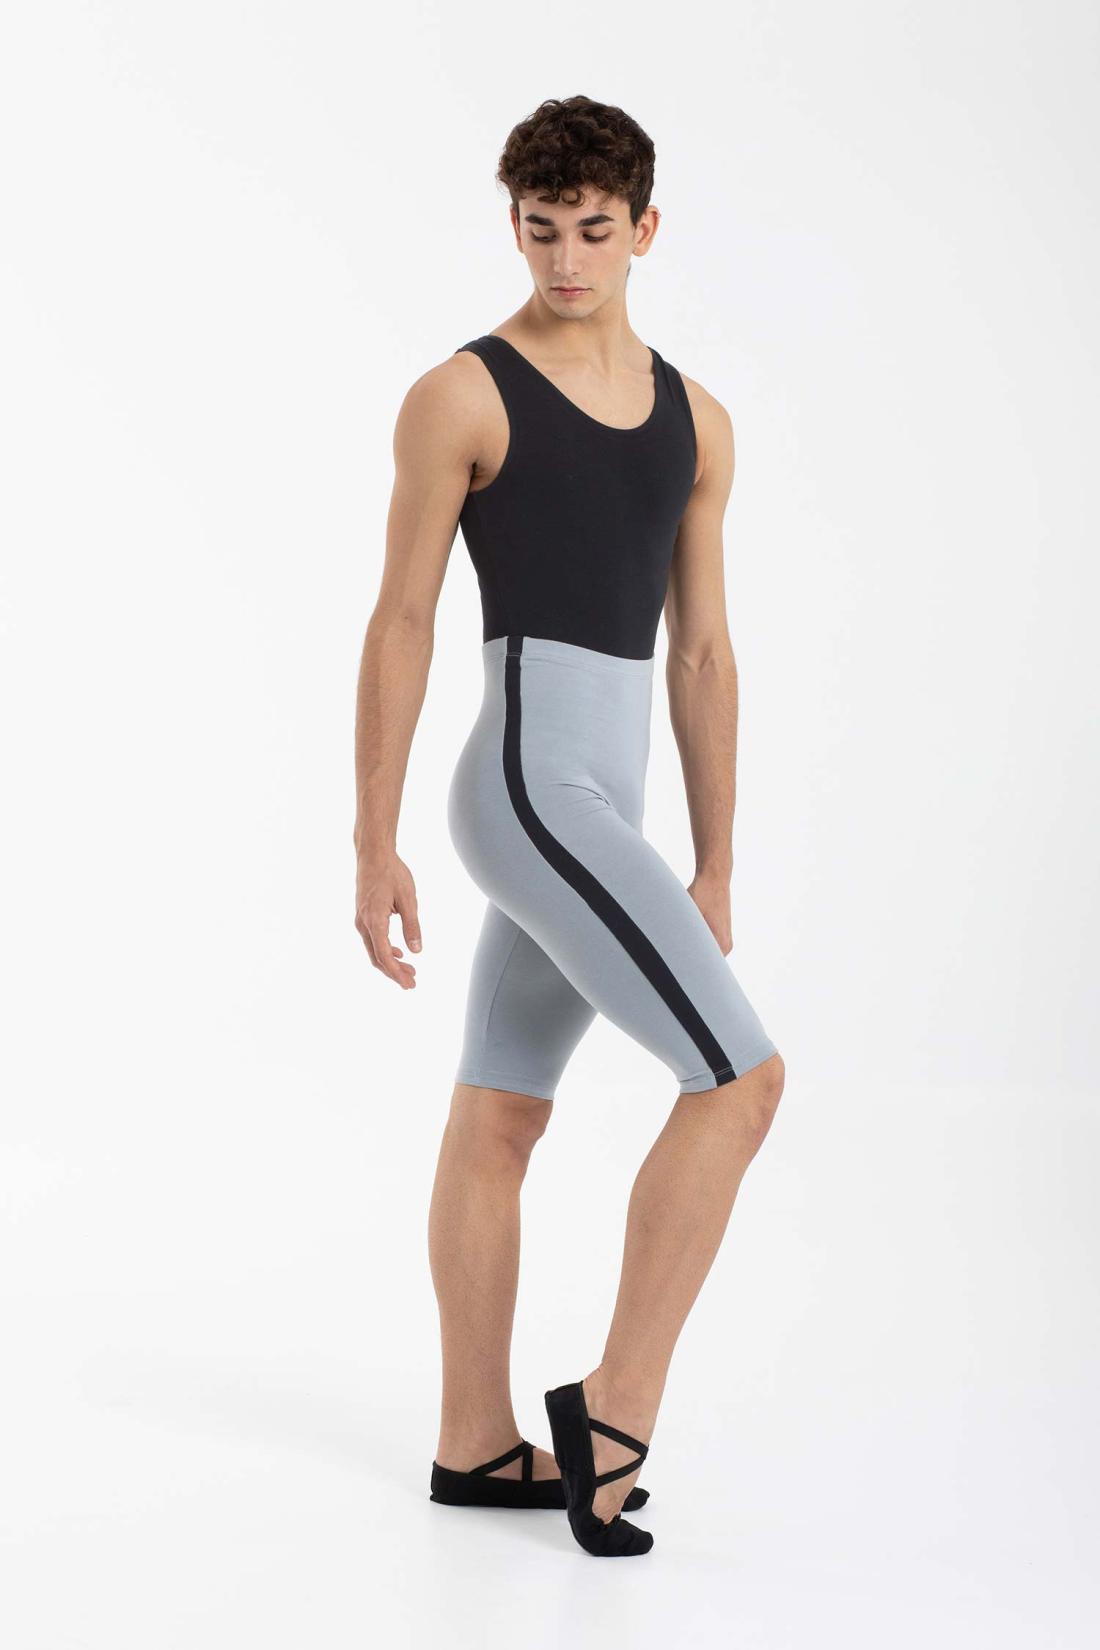 Over-the-knee Men's Pants with stripe on the sides for Male Dancers in Organic Cotton Intermezzo Ballet Danc